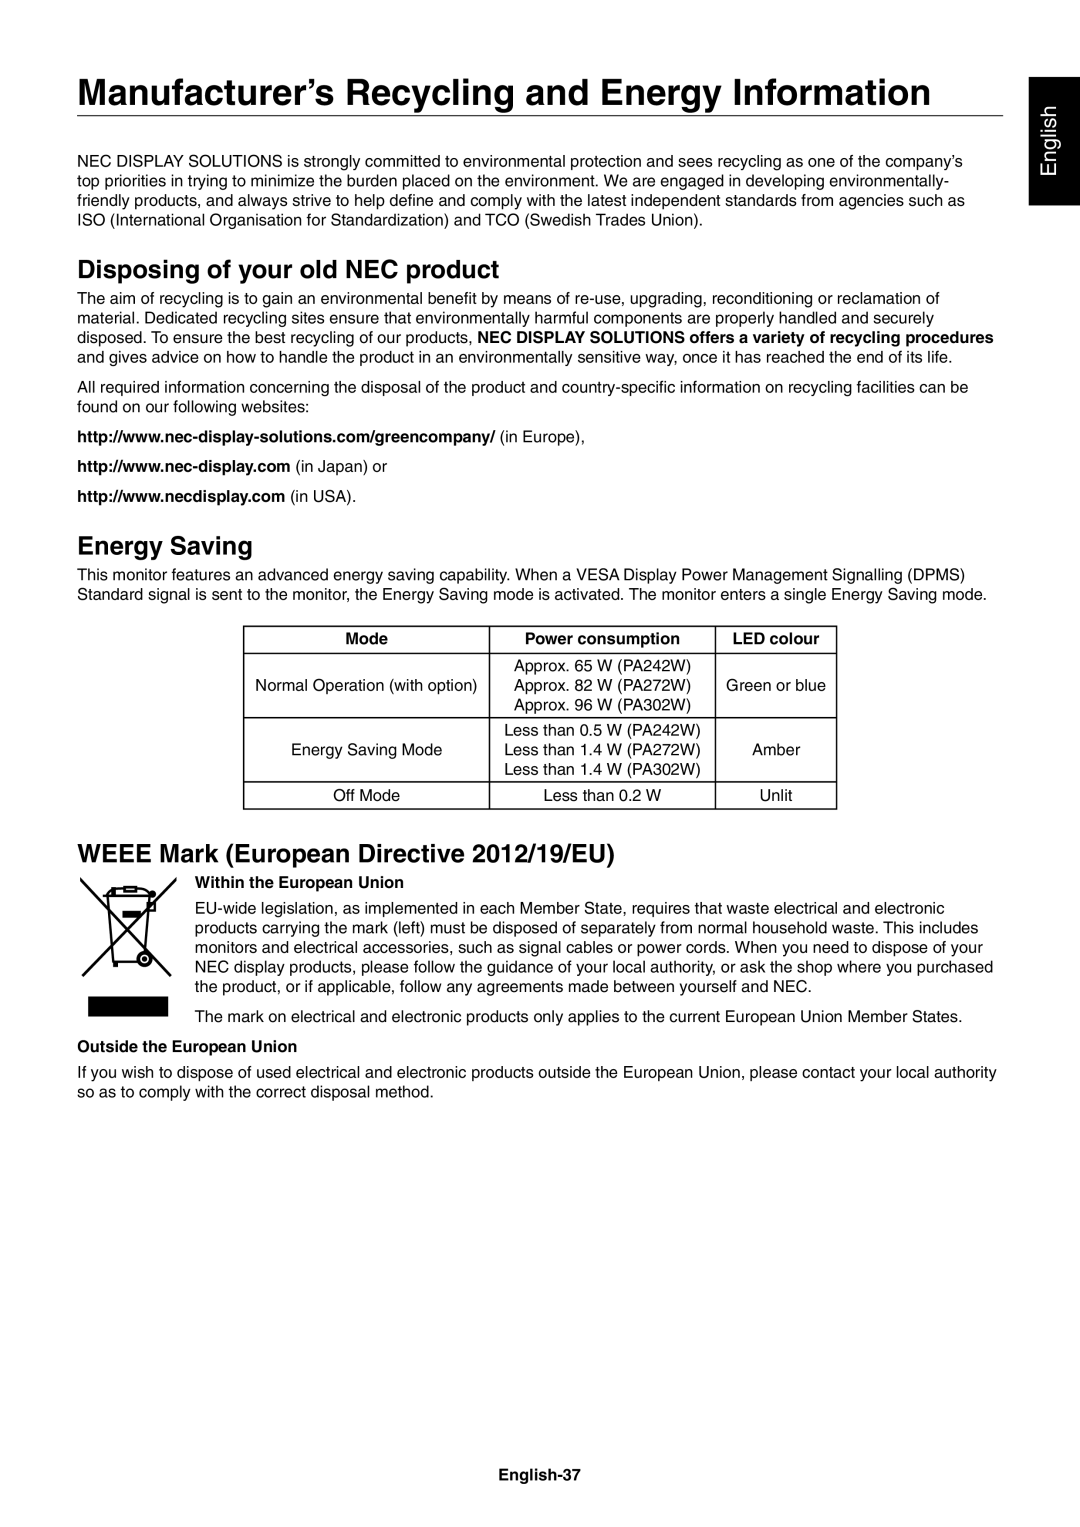 NEC PA242W Manufacturer’s Recycling and Energy Information, Disposing of your old NEC product, Energy Saving, English 